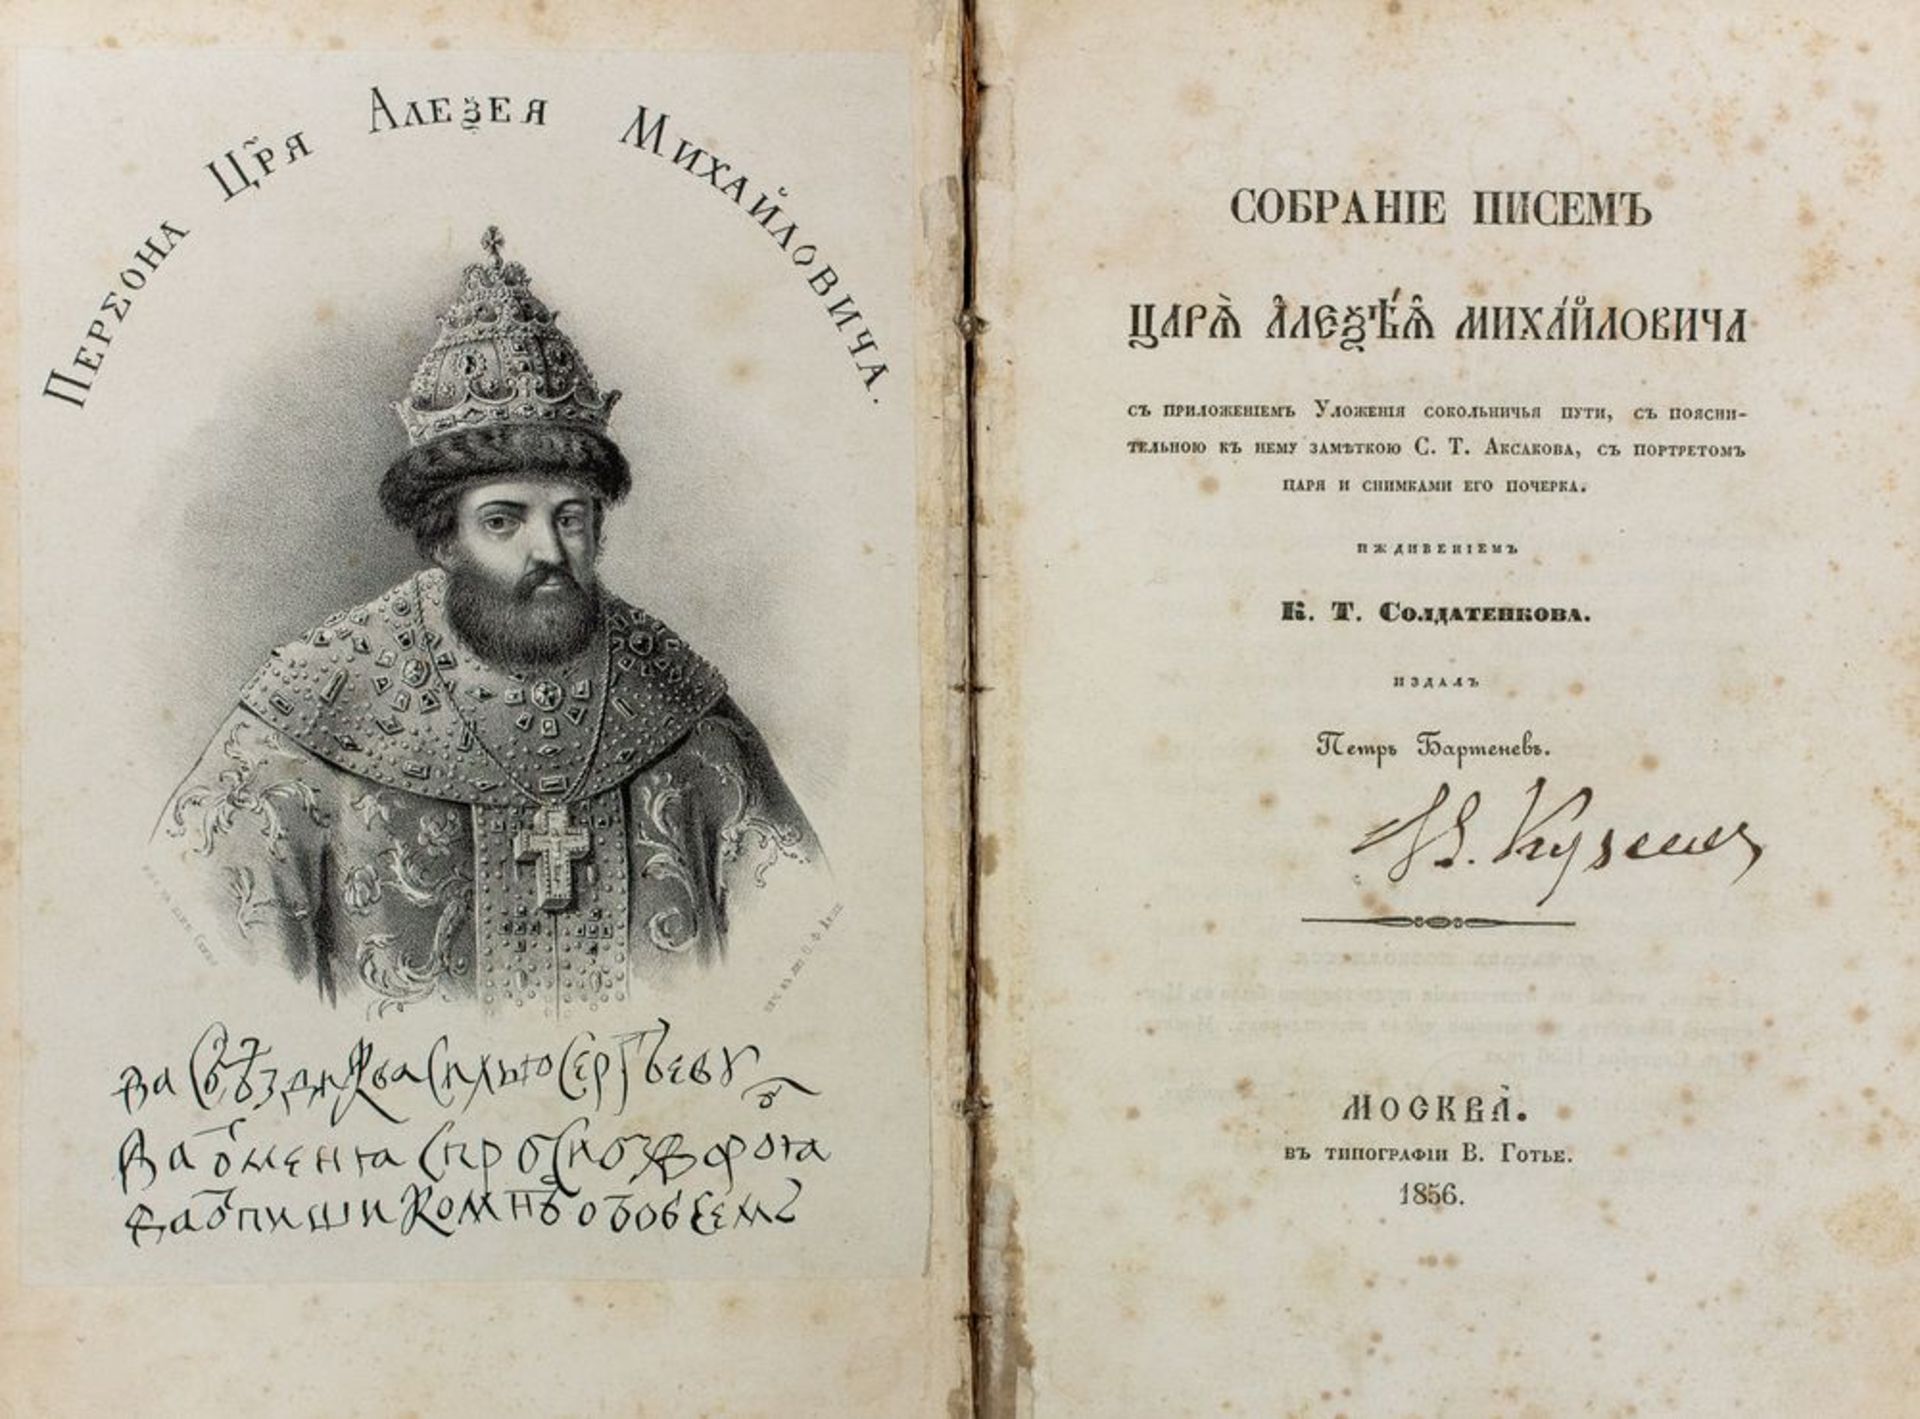 A Collection of Letters of Alexis Mikhailovitch, a Russian Tsar. Moscow, Gauthier, [...]